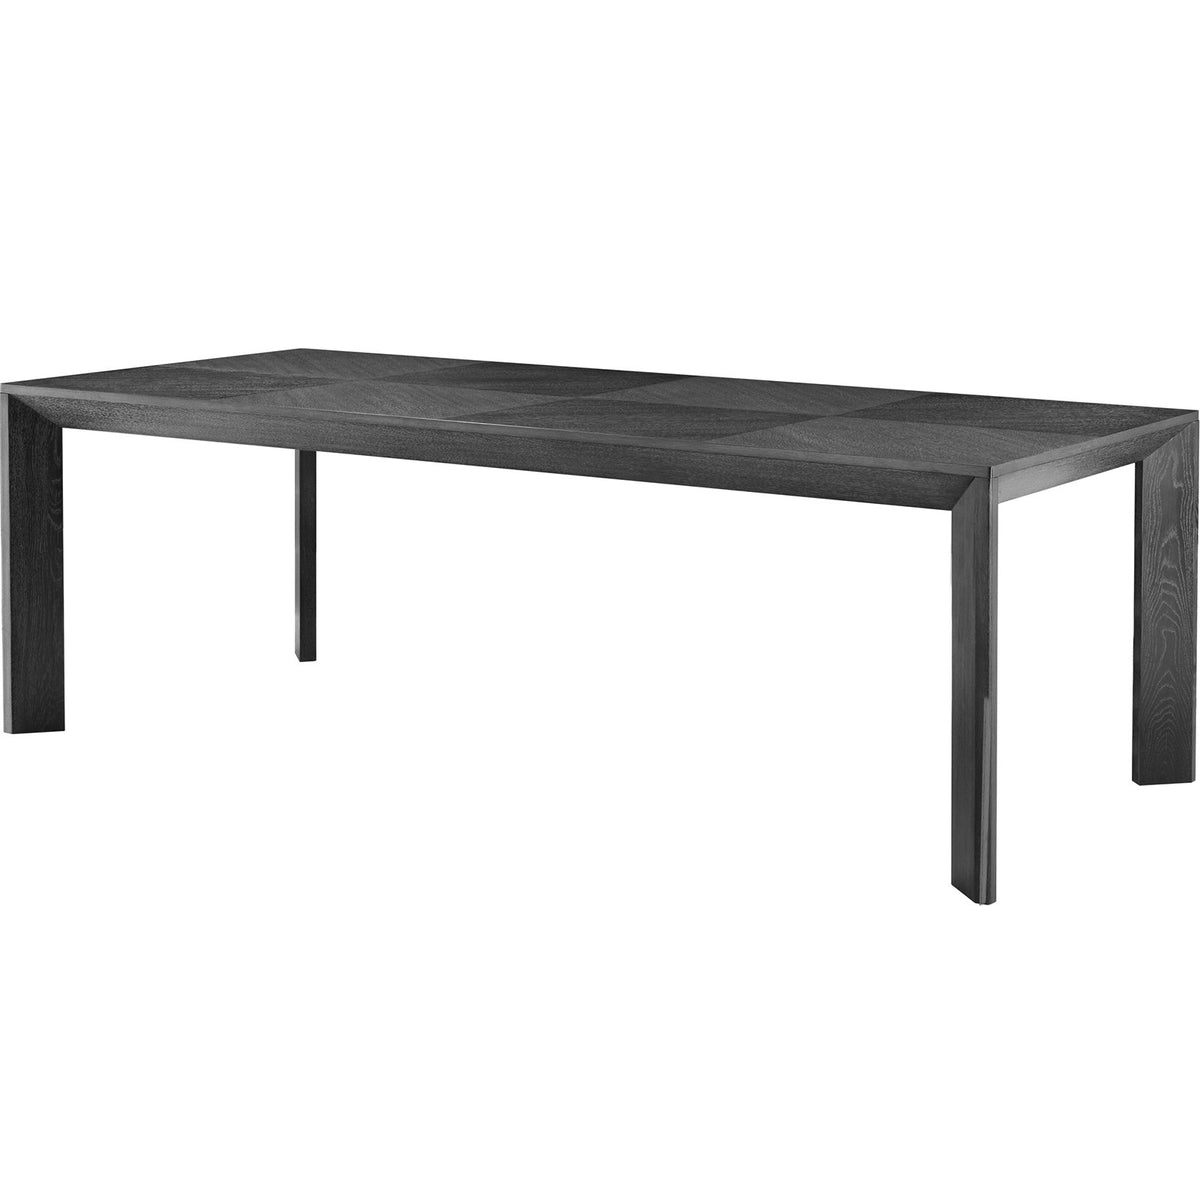 Tremont Dining Table